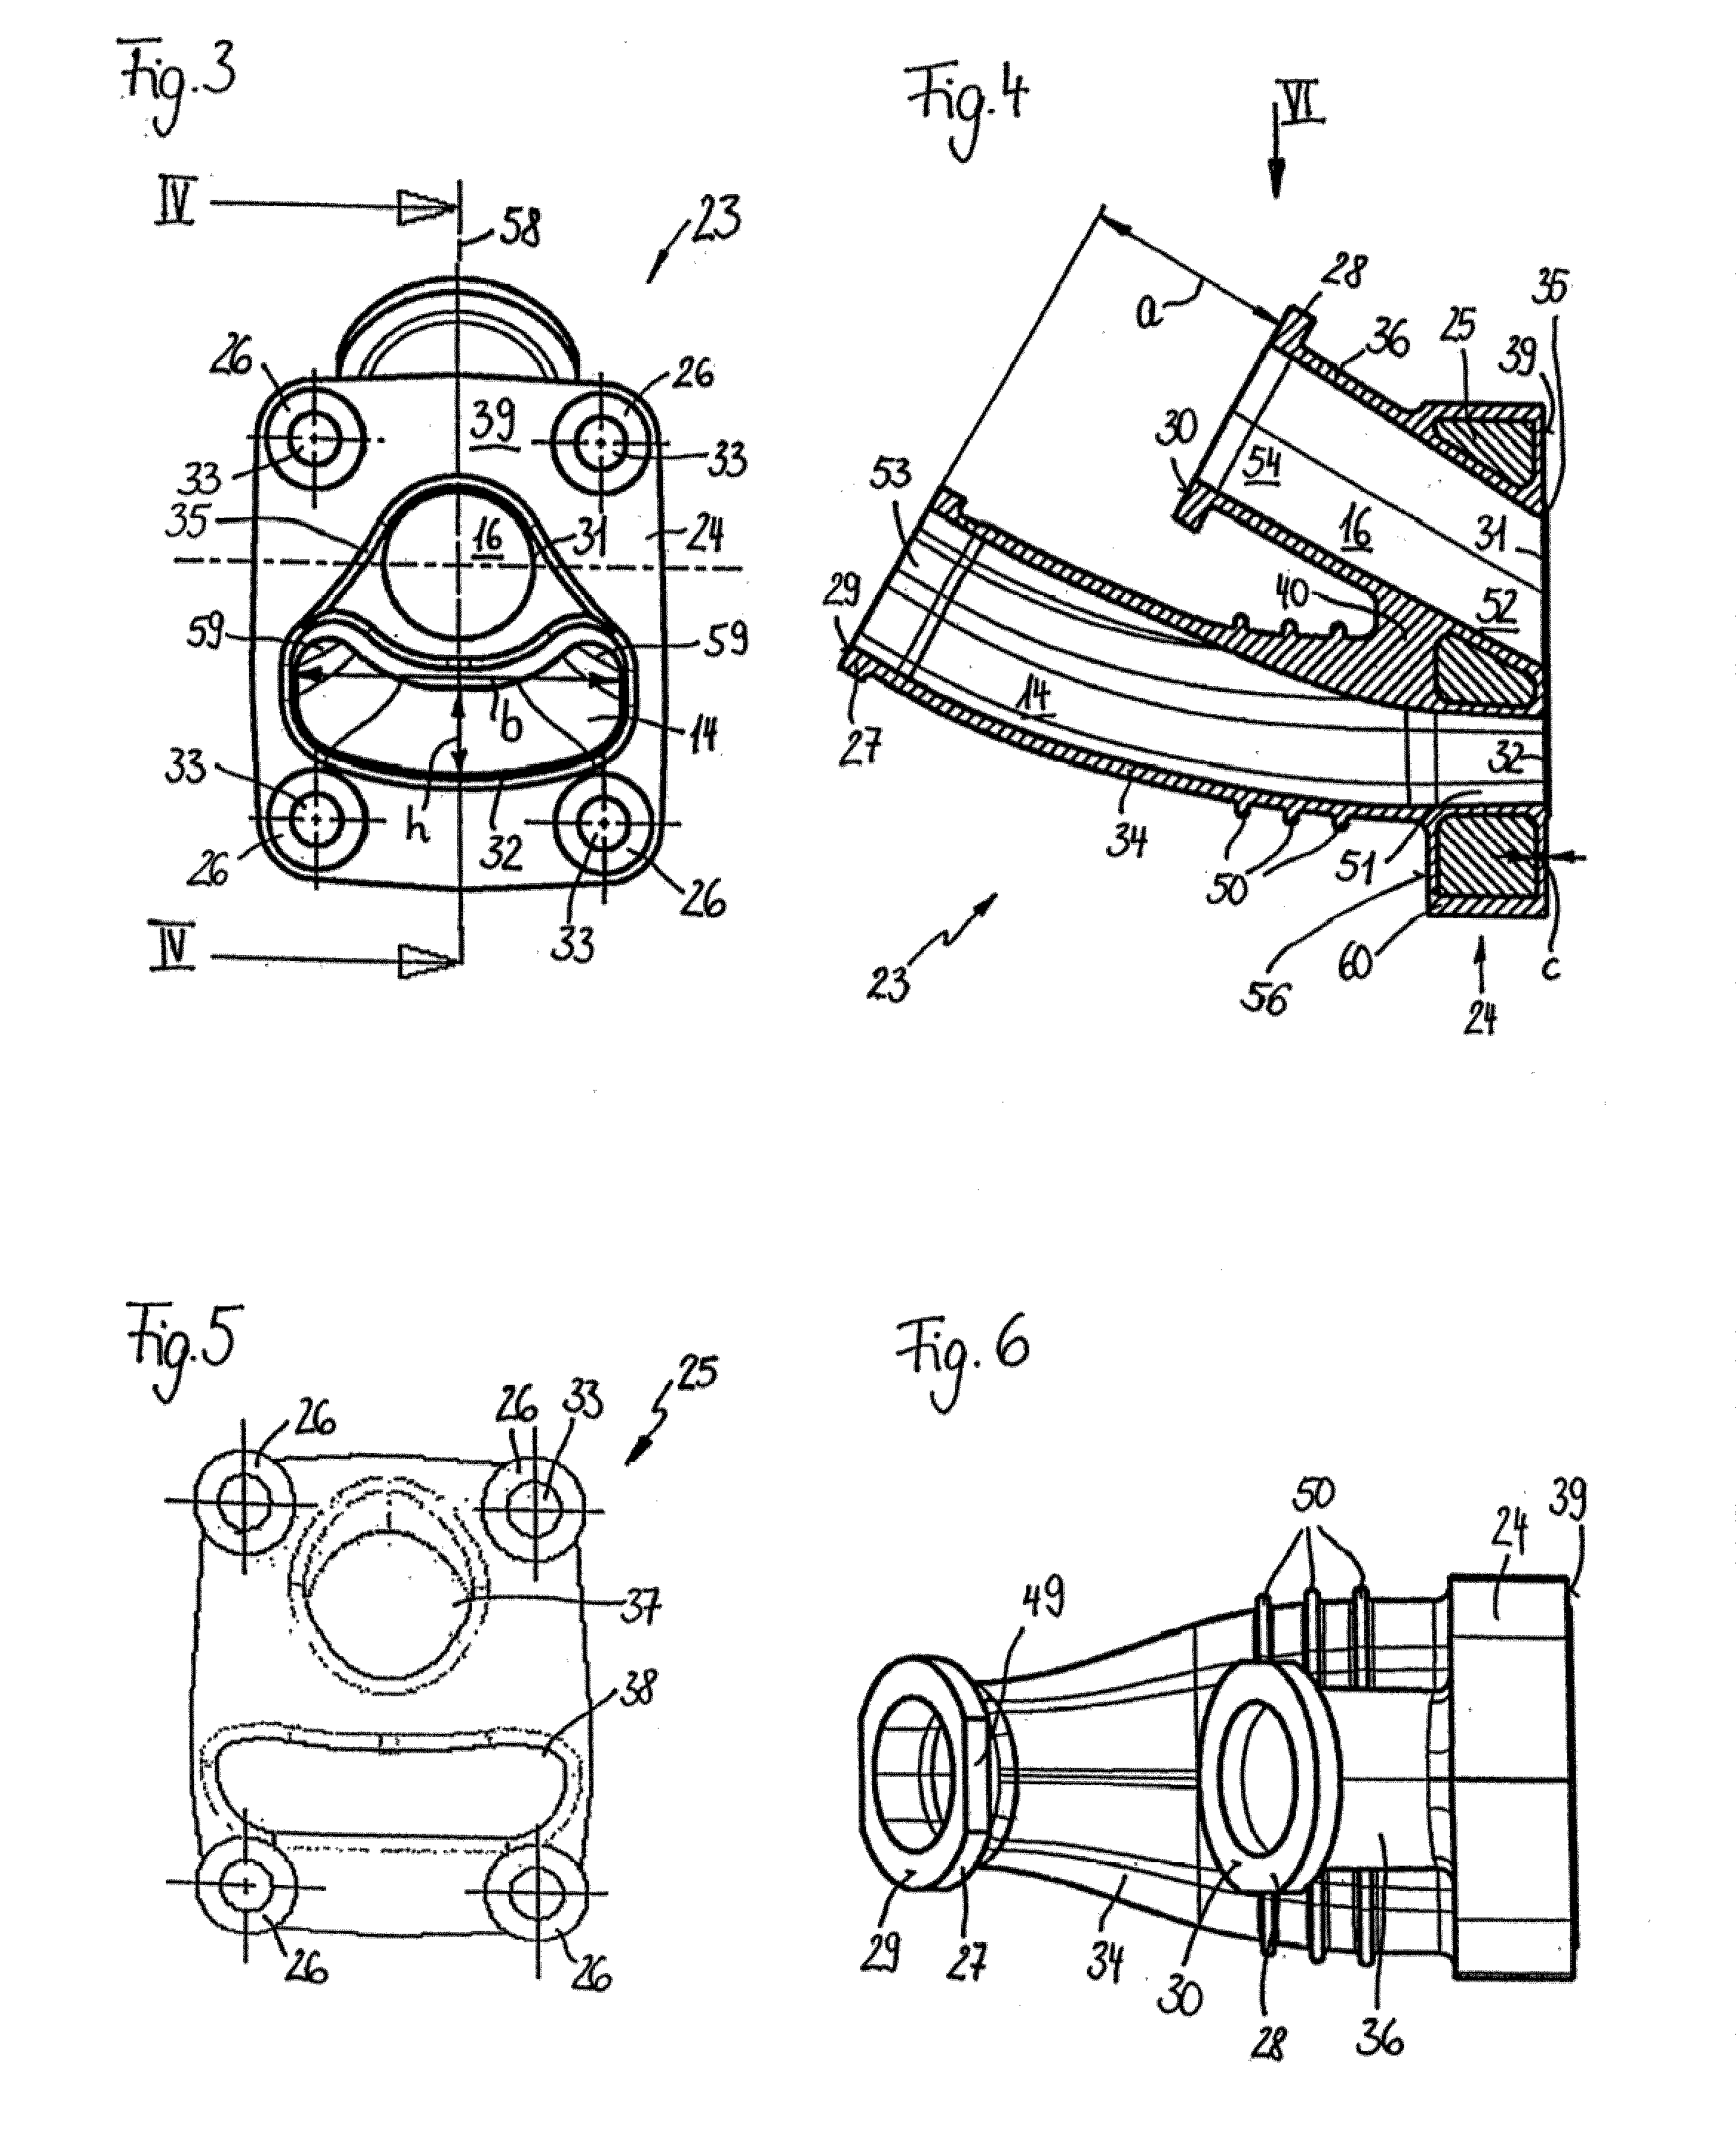 Internal Combustion Engine Having an Elastic Connecting Duct